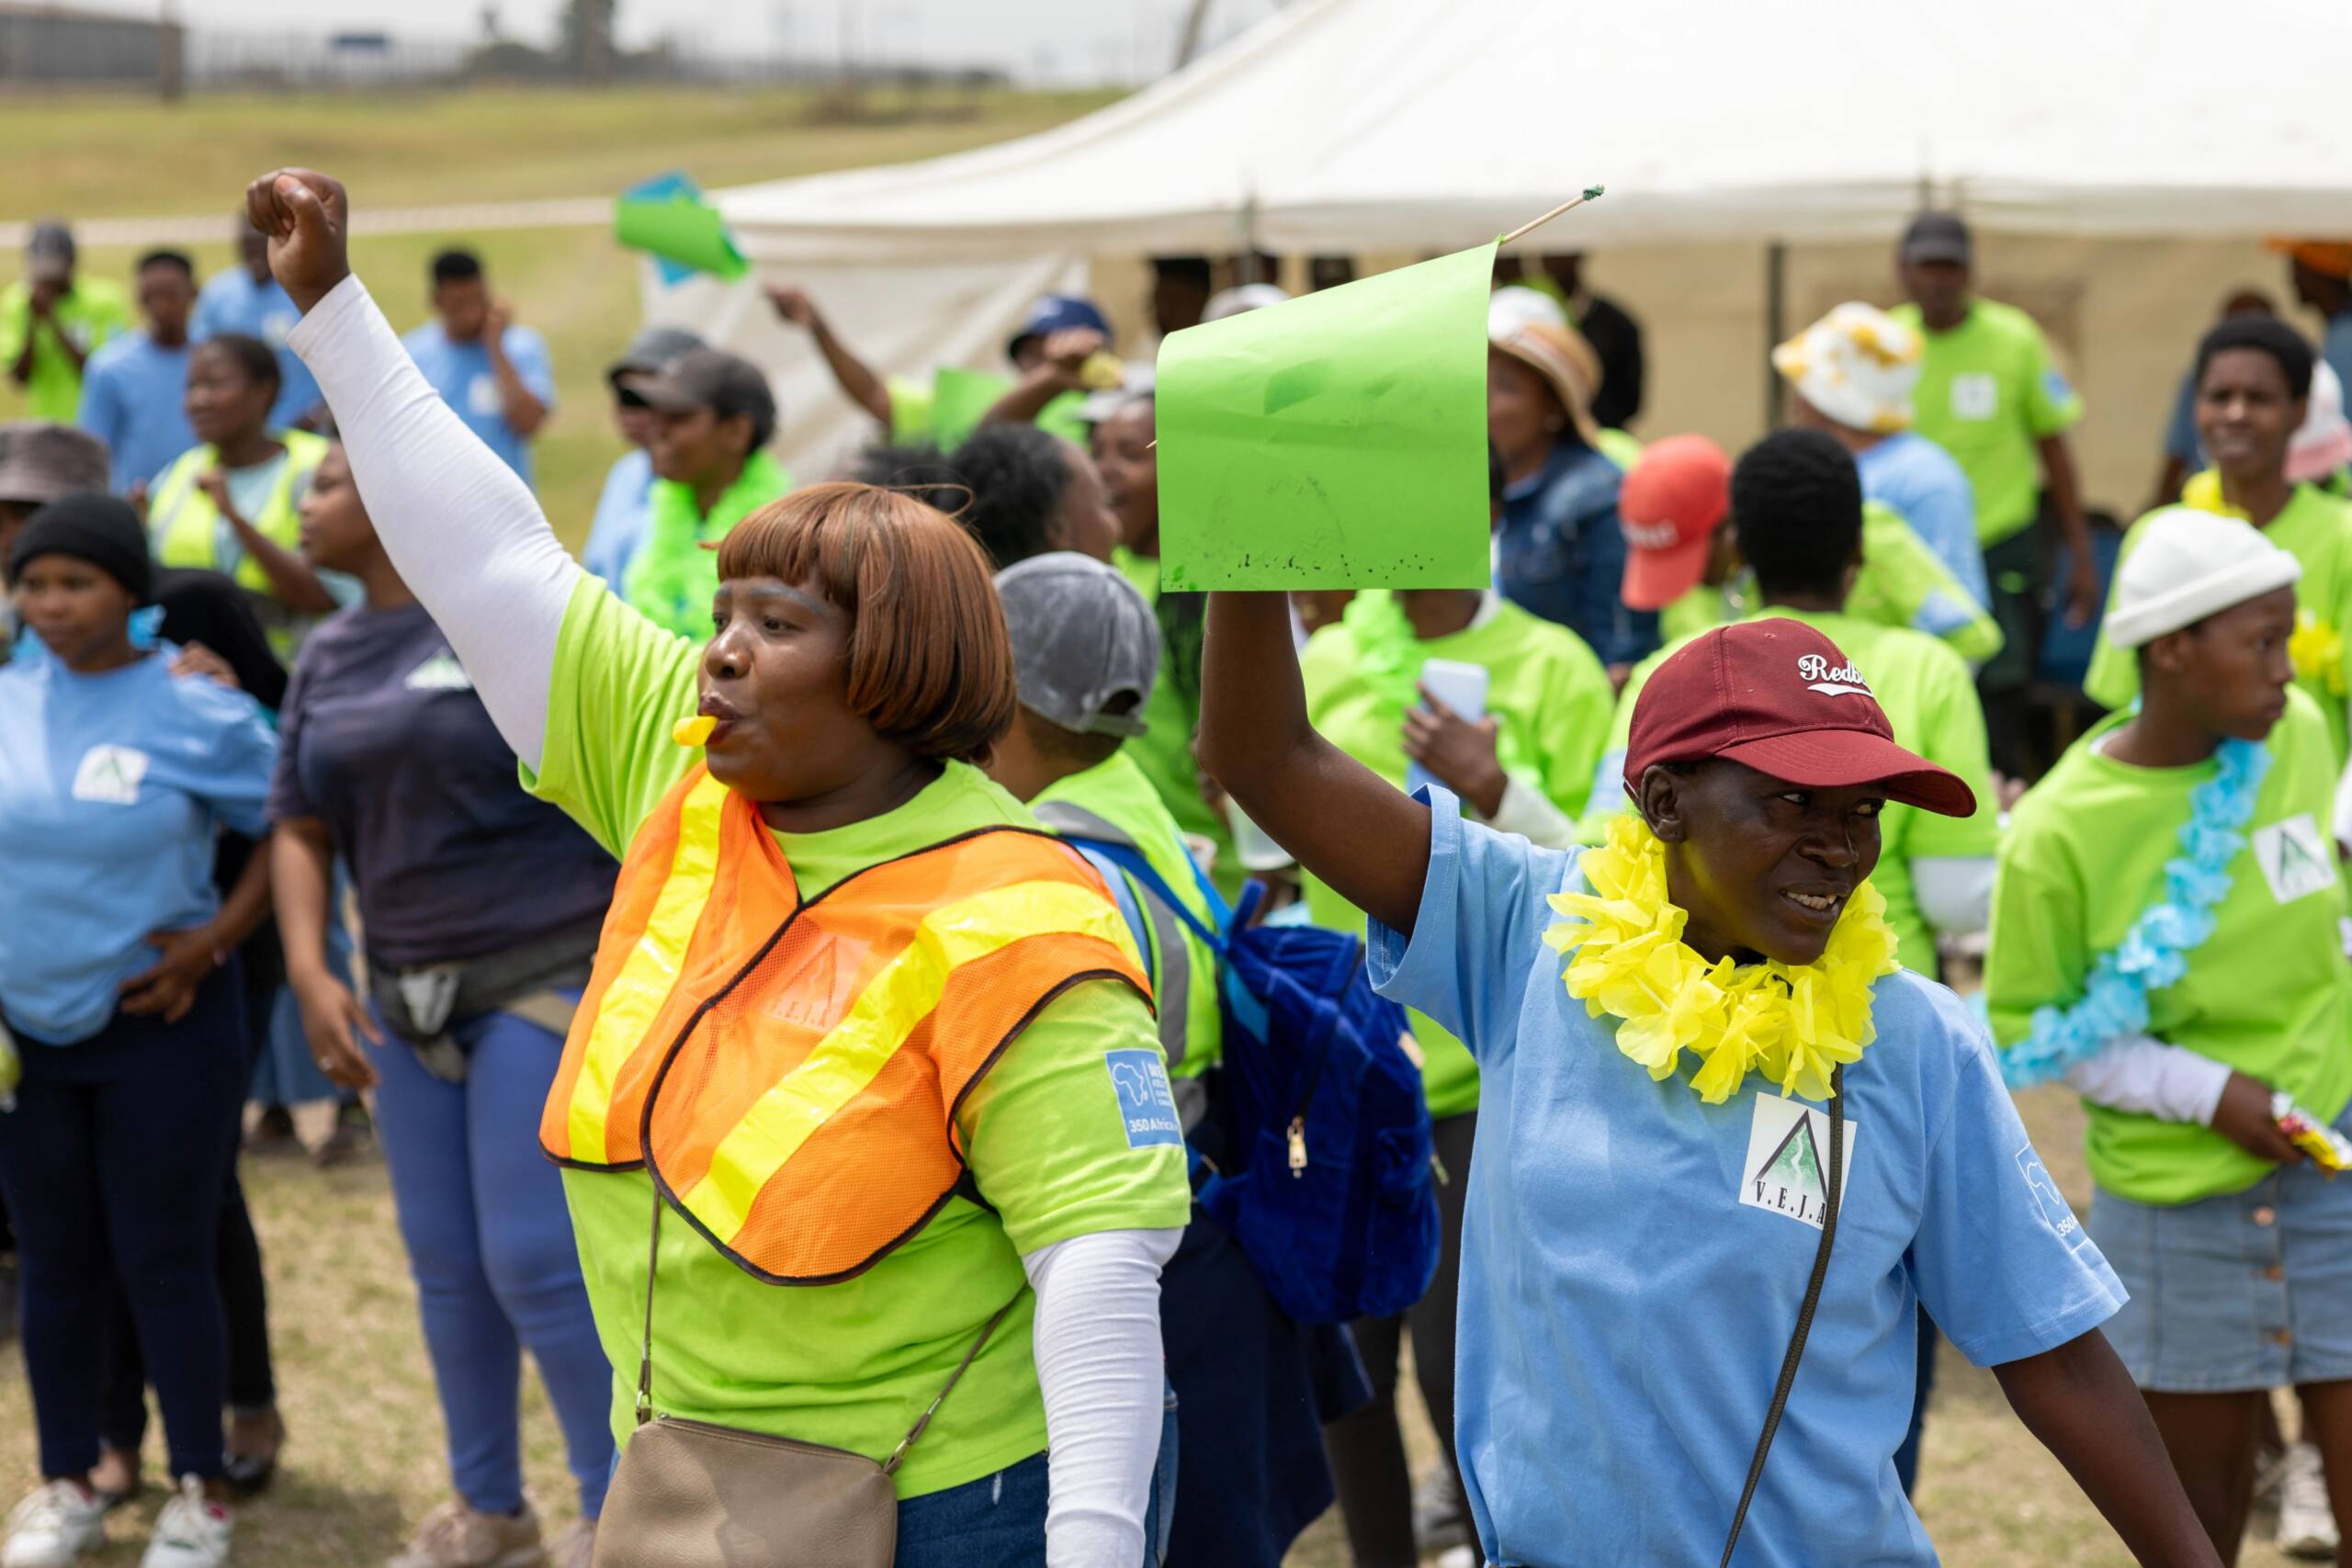 Salsolburg, South Africa, November 3: activists hold a parade and festival outside of SASOL plant, Africa's largest gas-fired power plant, to expose the impacts of fossil fuels and call for more investments in renewables. Photo credit: Oliver Karstel / Sound Idea